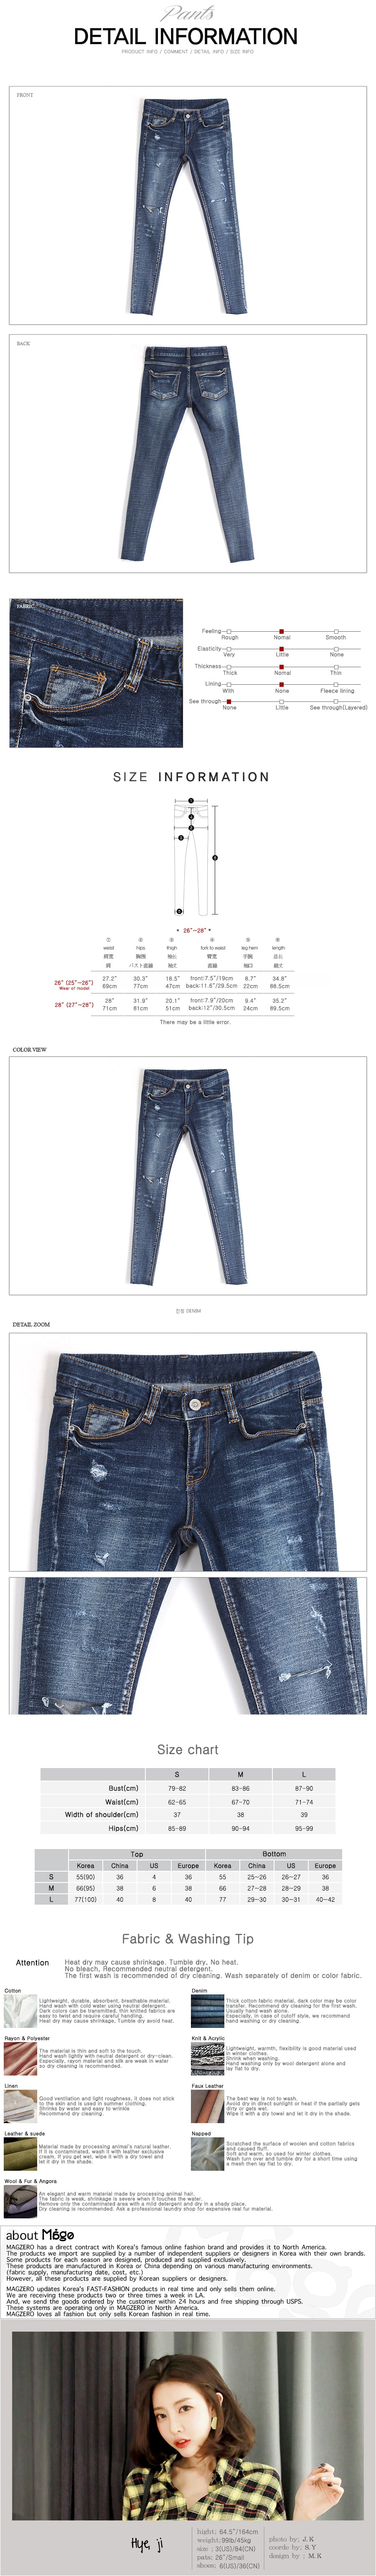 KOREA Distressed Cropped Skinny Jeans #Dark Blue S(25-26) [Free Shipping]